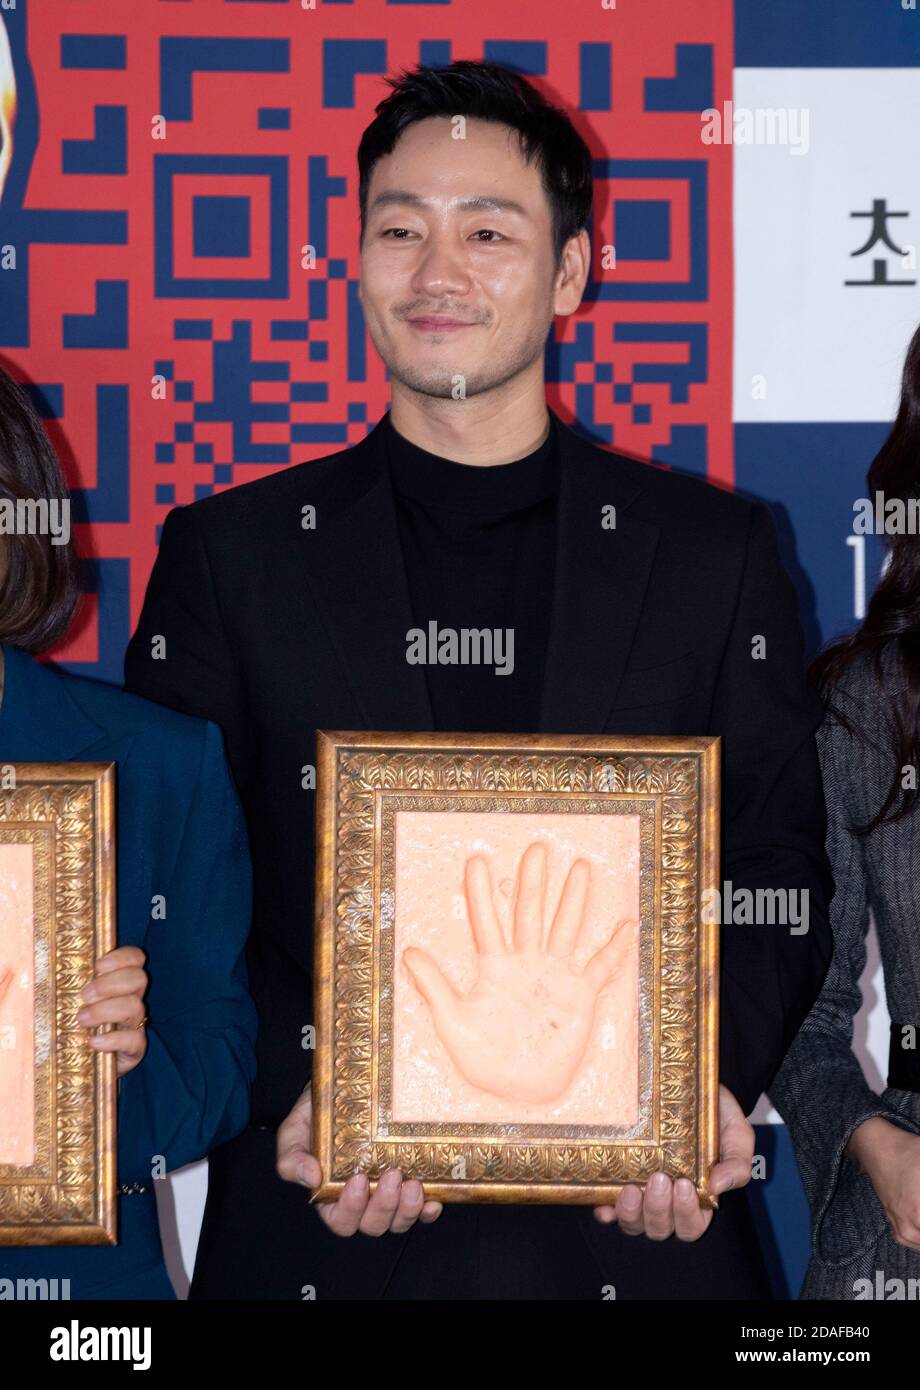 Seoul, South Korea. 12th Nov, 2020. South Korean actor Park Hae-soo, attend a hands printing event for the "41st Blue Dragon Film Awards" at CGV Cinema in Seoul, South Korea on November 12, 2020. (Photo by: Lee Young-ho/Sipa USA) Credit: Sipa USA/Alamy Live News Stock Photo